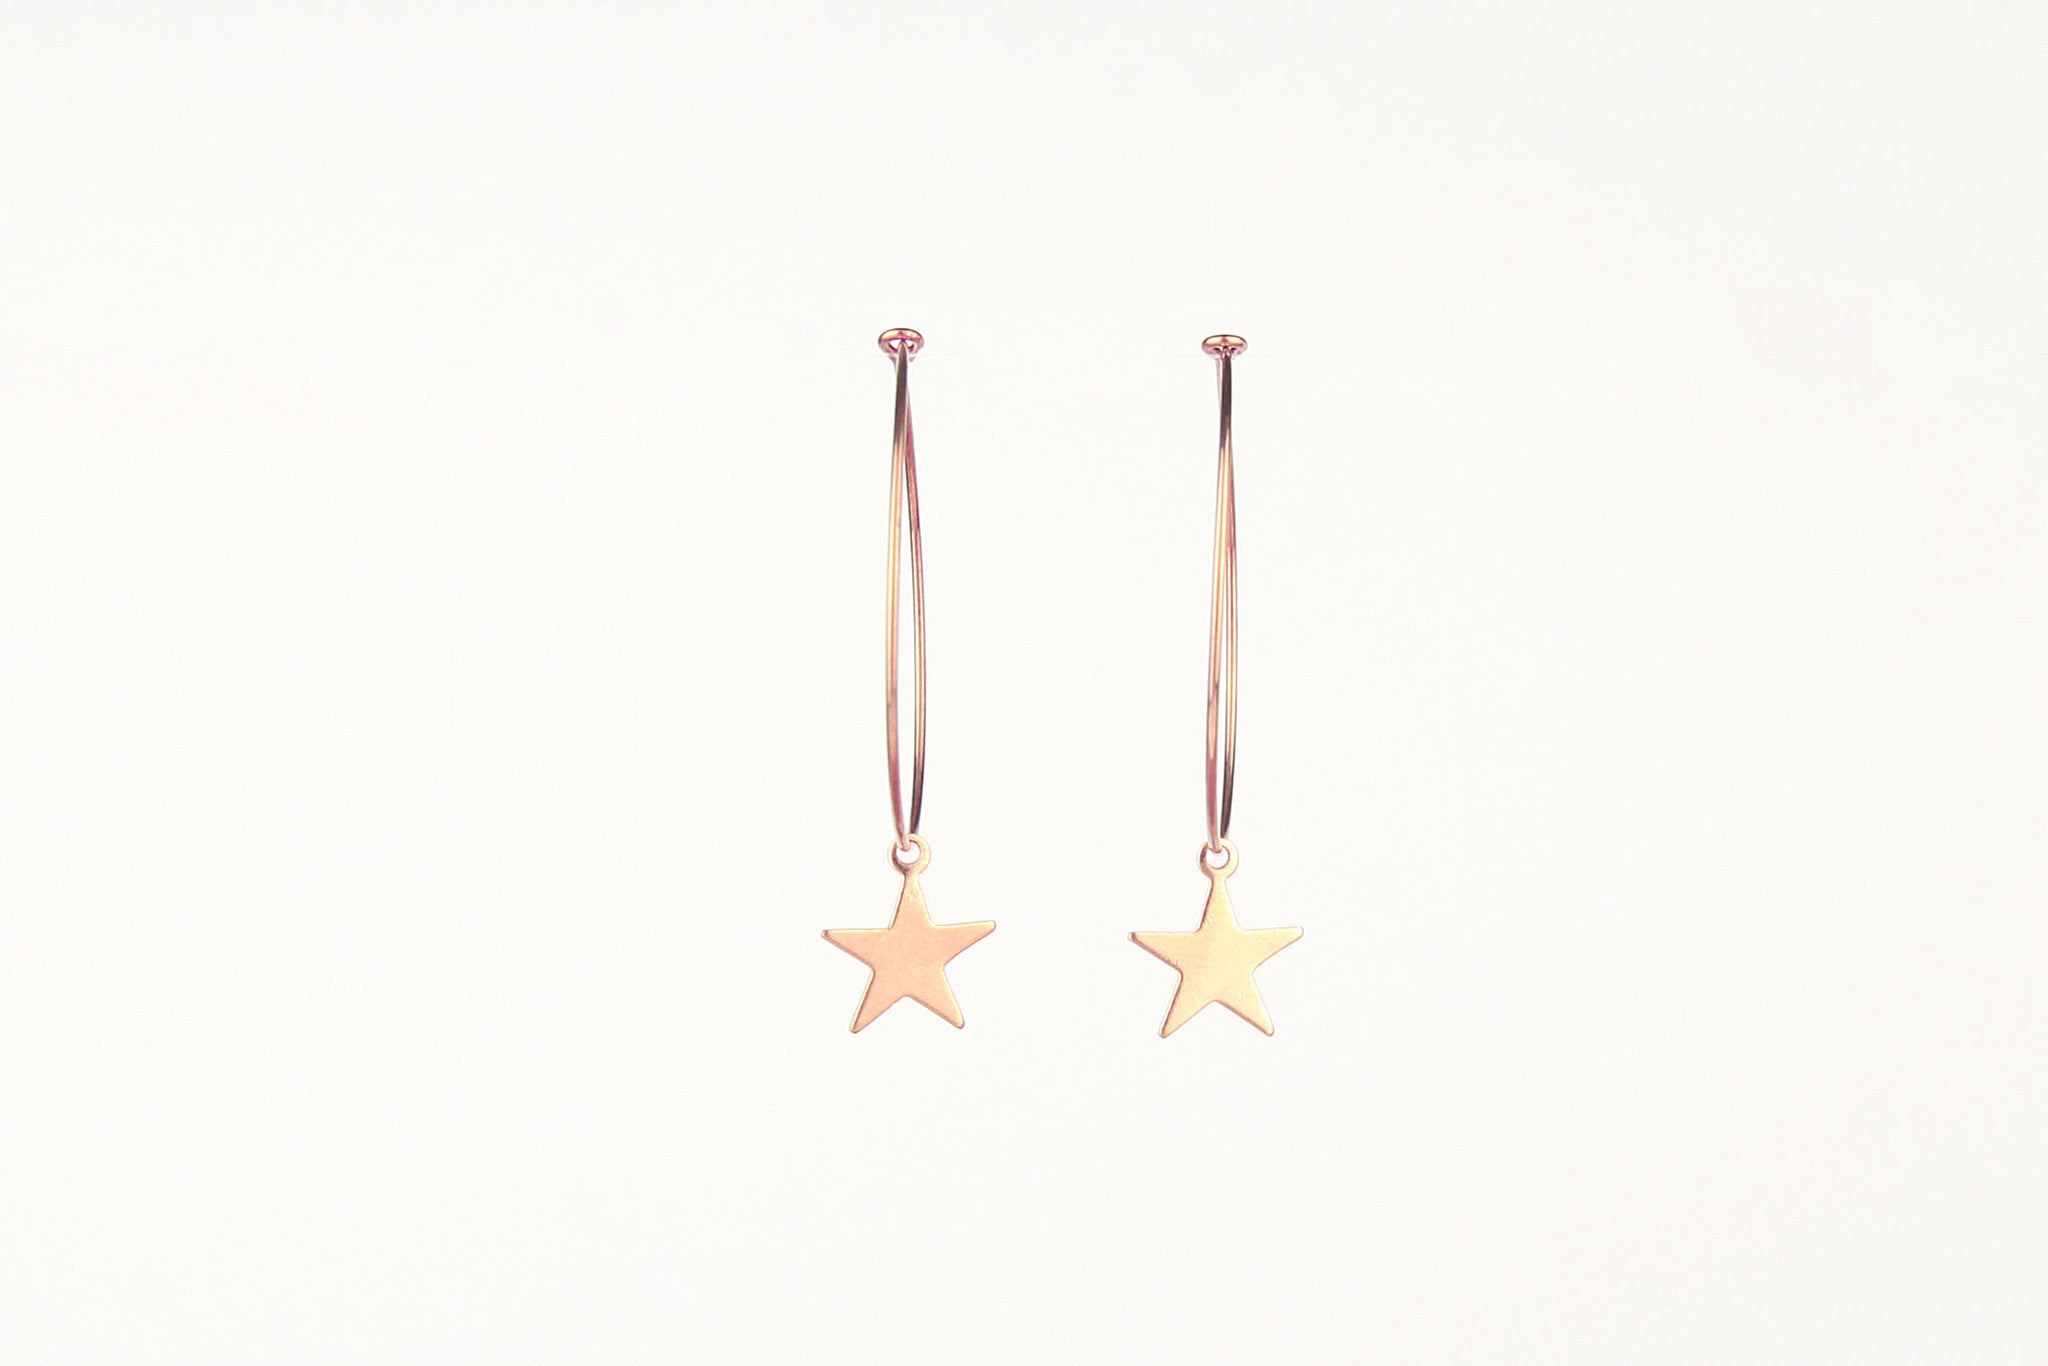 jewelberry ohrringe earrings plain star hoops rose gold plated sterling silver fine jewelry handmade with love fairtrade